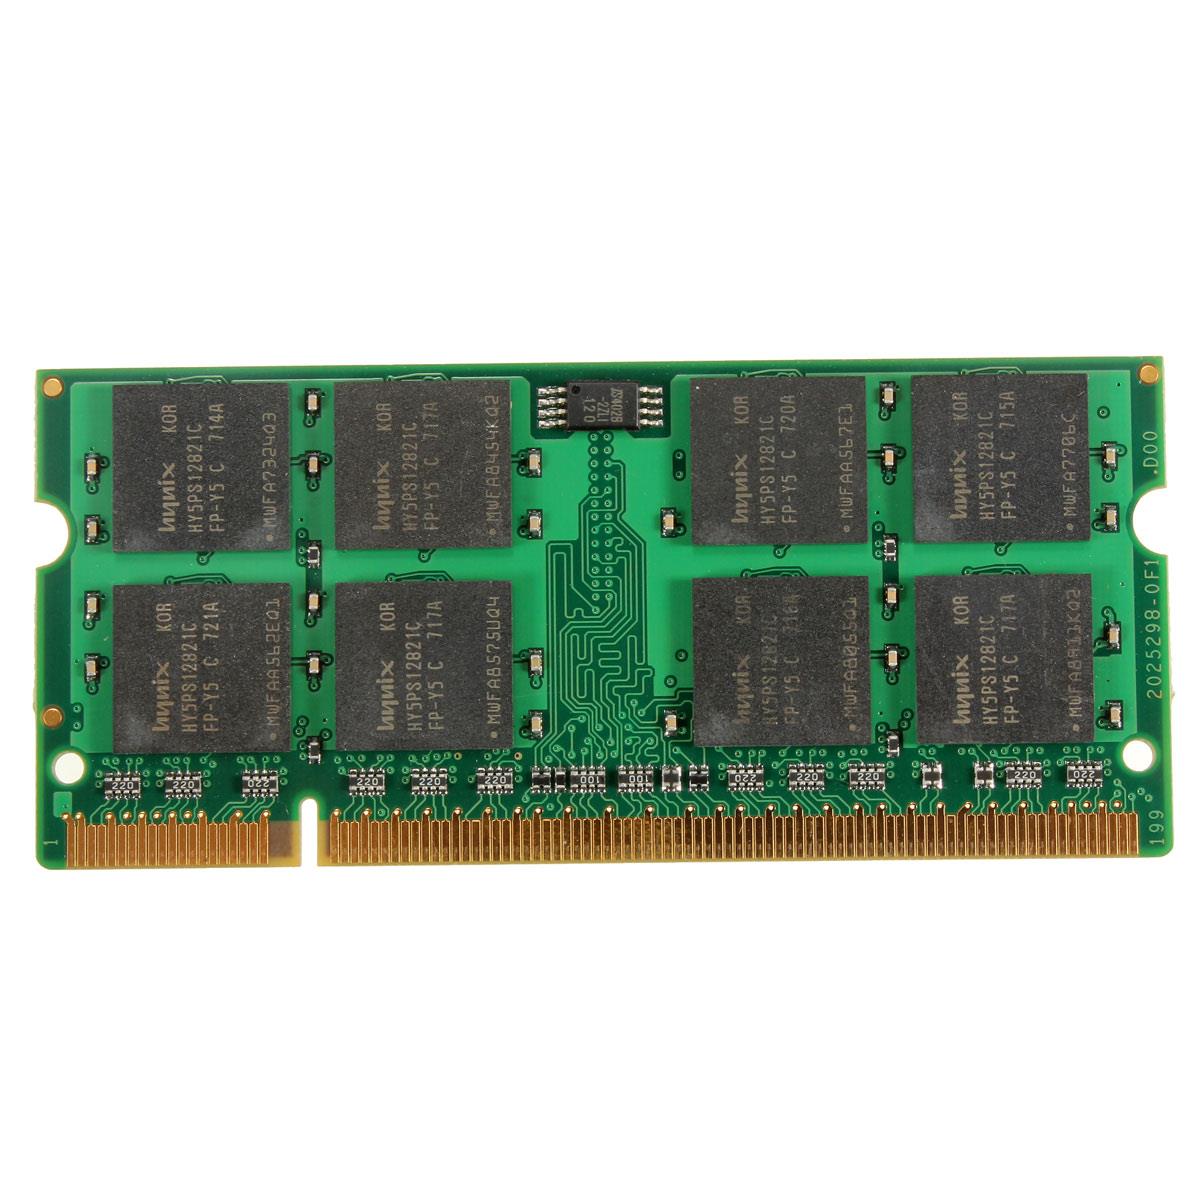 1GB DDR2 533 PC2 4200 Non ECC Computer Laptop PC DIMM Memory RAM 200 pins For Multiple System